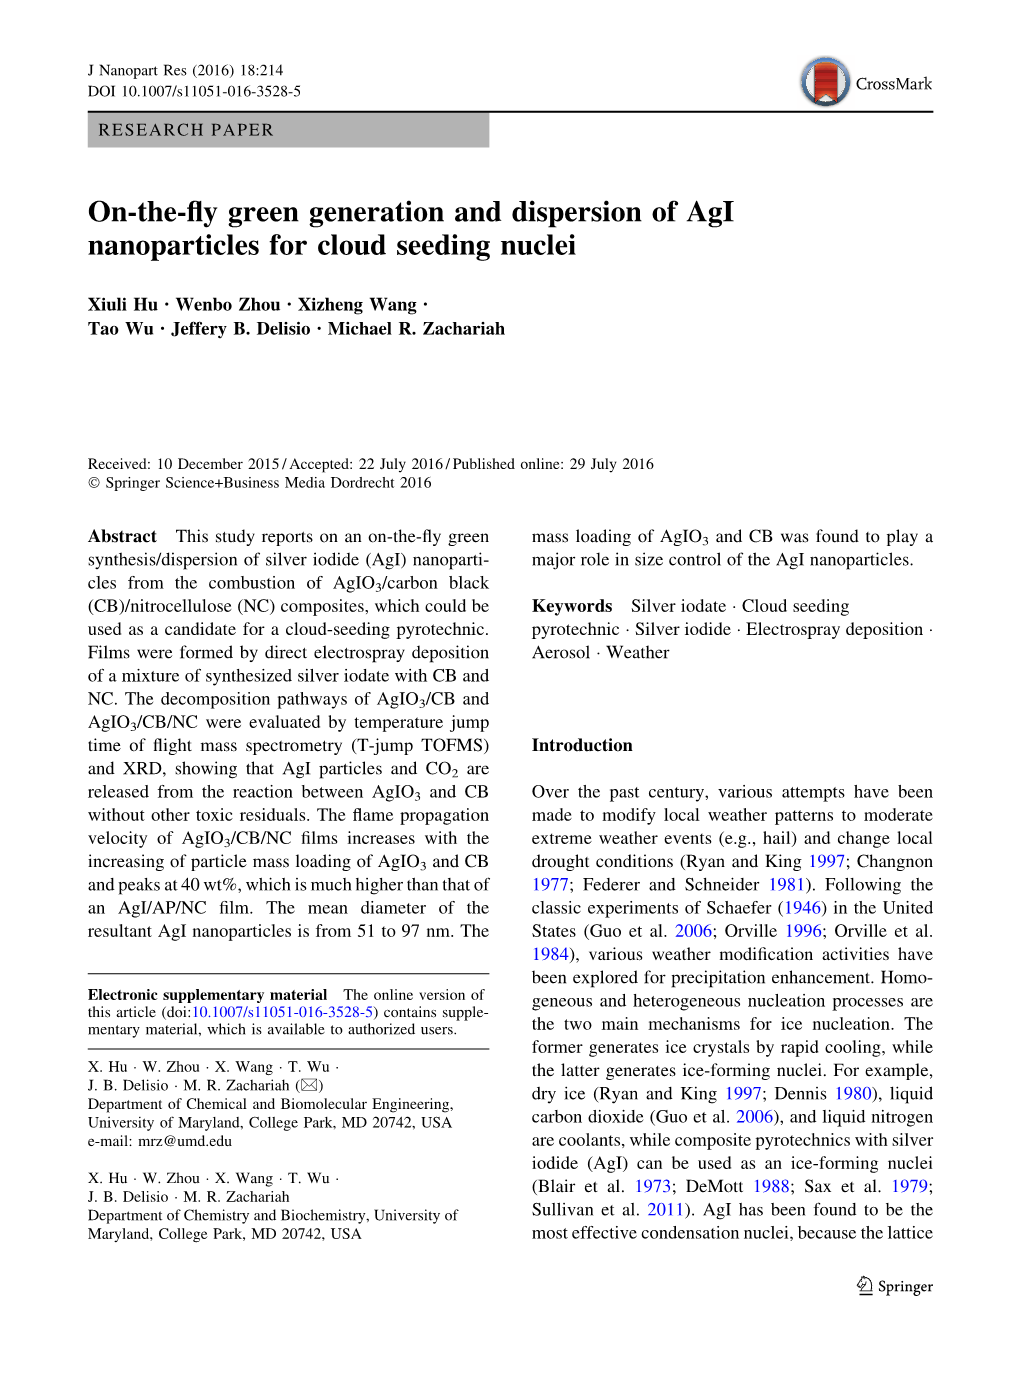 On-The-Fly Green Generation and Dispersion of Agi Nanoparticles For